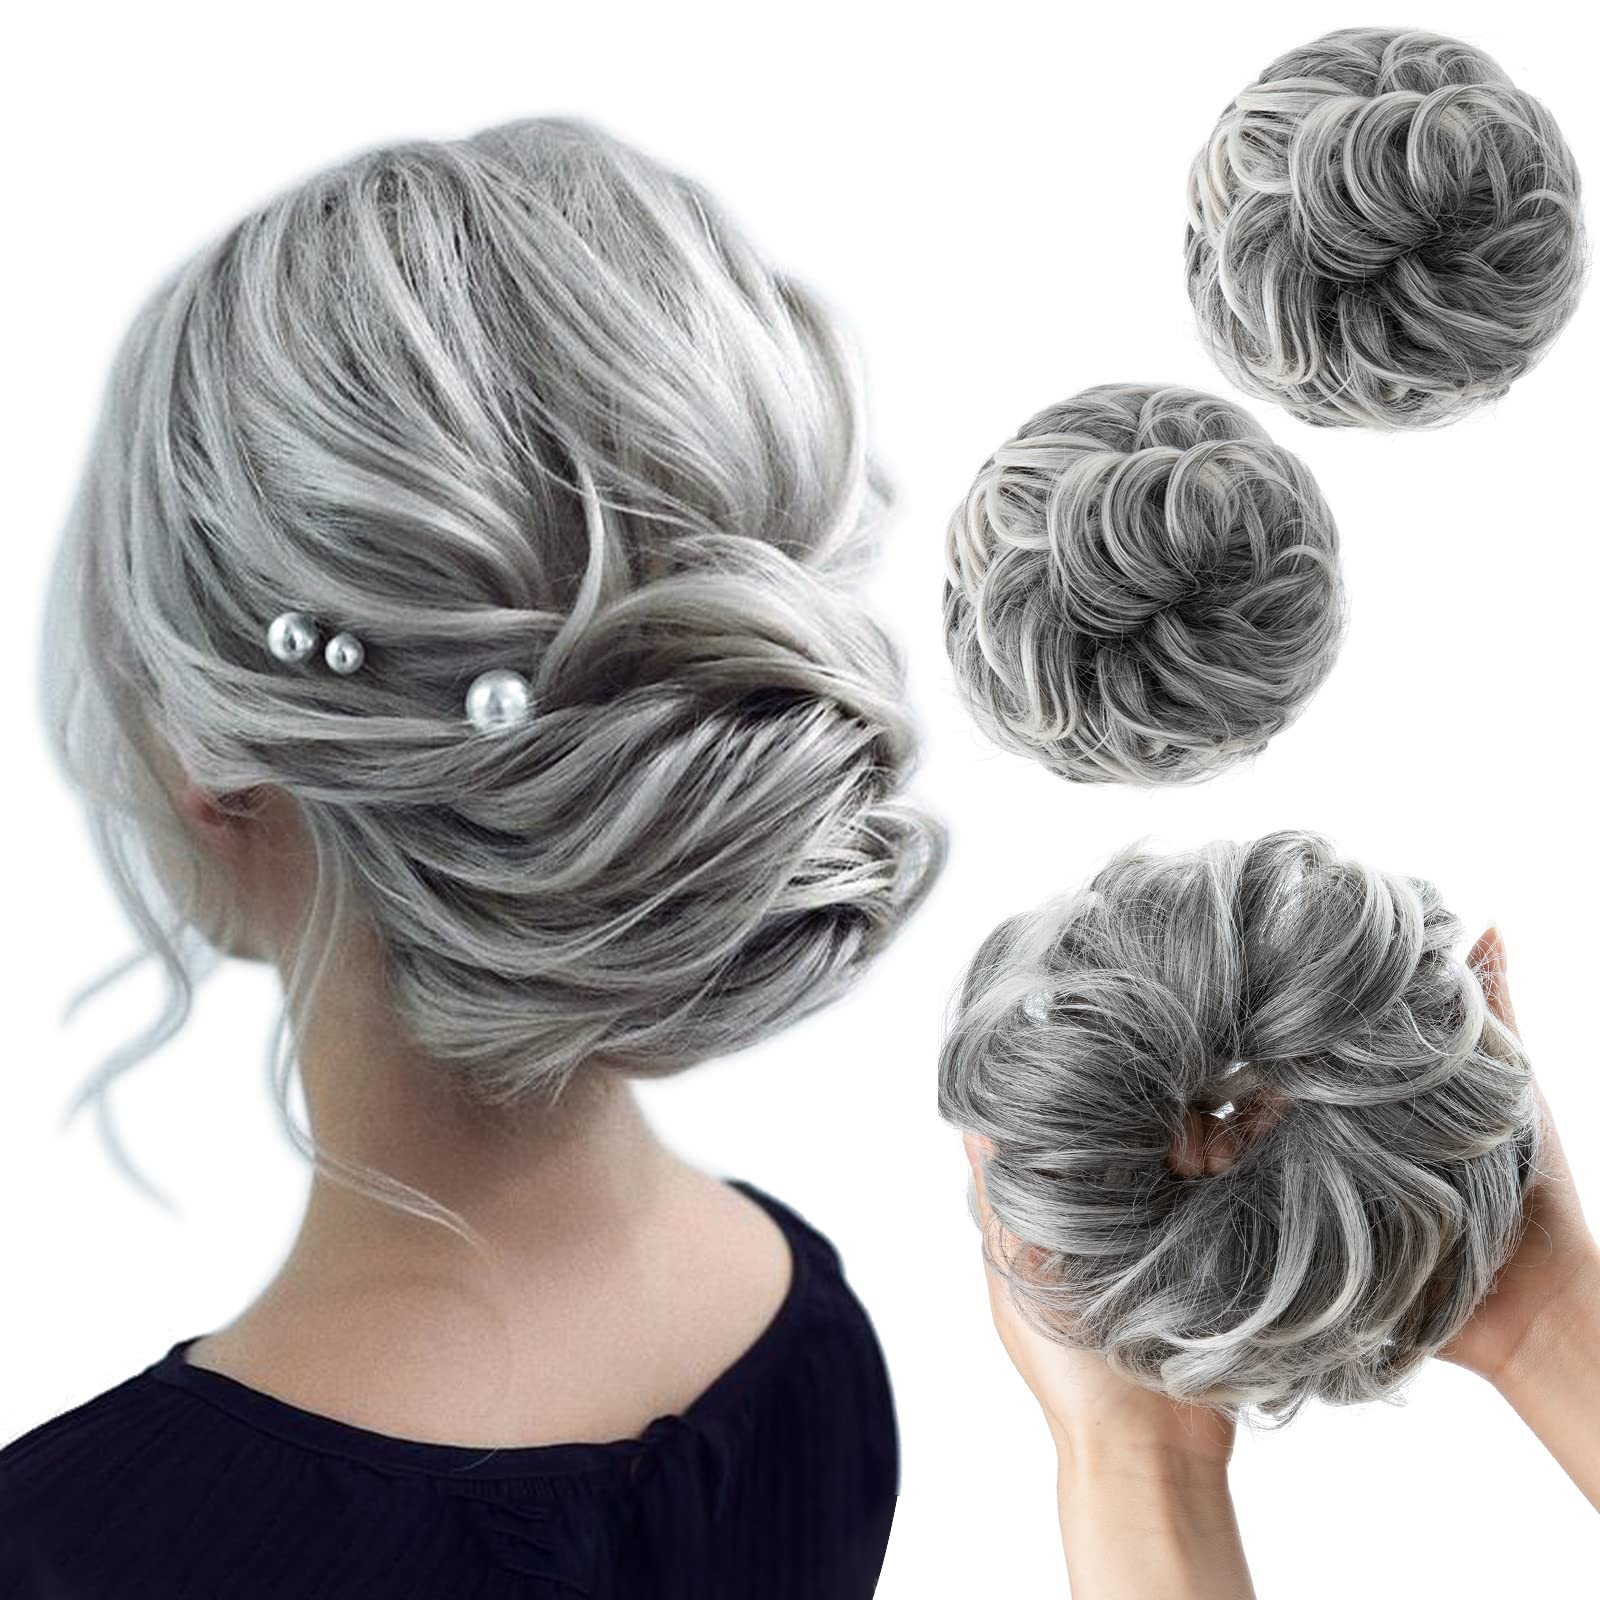 SARLA Grey Messy Bun Hair Piece Synthetic Wavy Curly Chignon Ponytail  Extension Scrunchies Updo for Women Girls Black with Grey/Platinum Blonde  2PCS Gray and White Tips